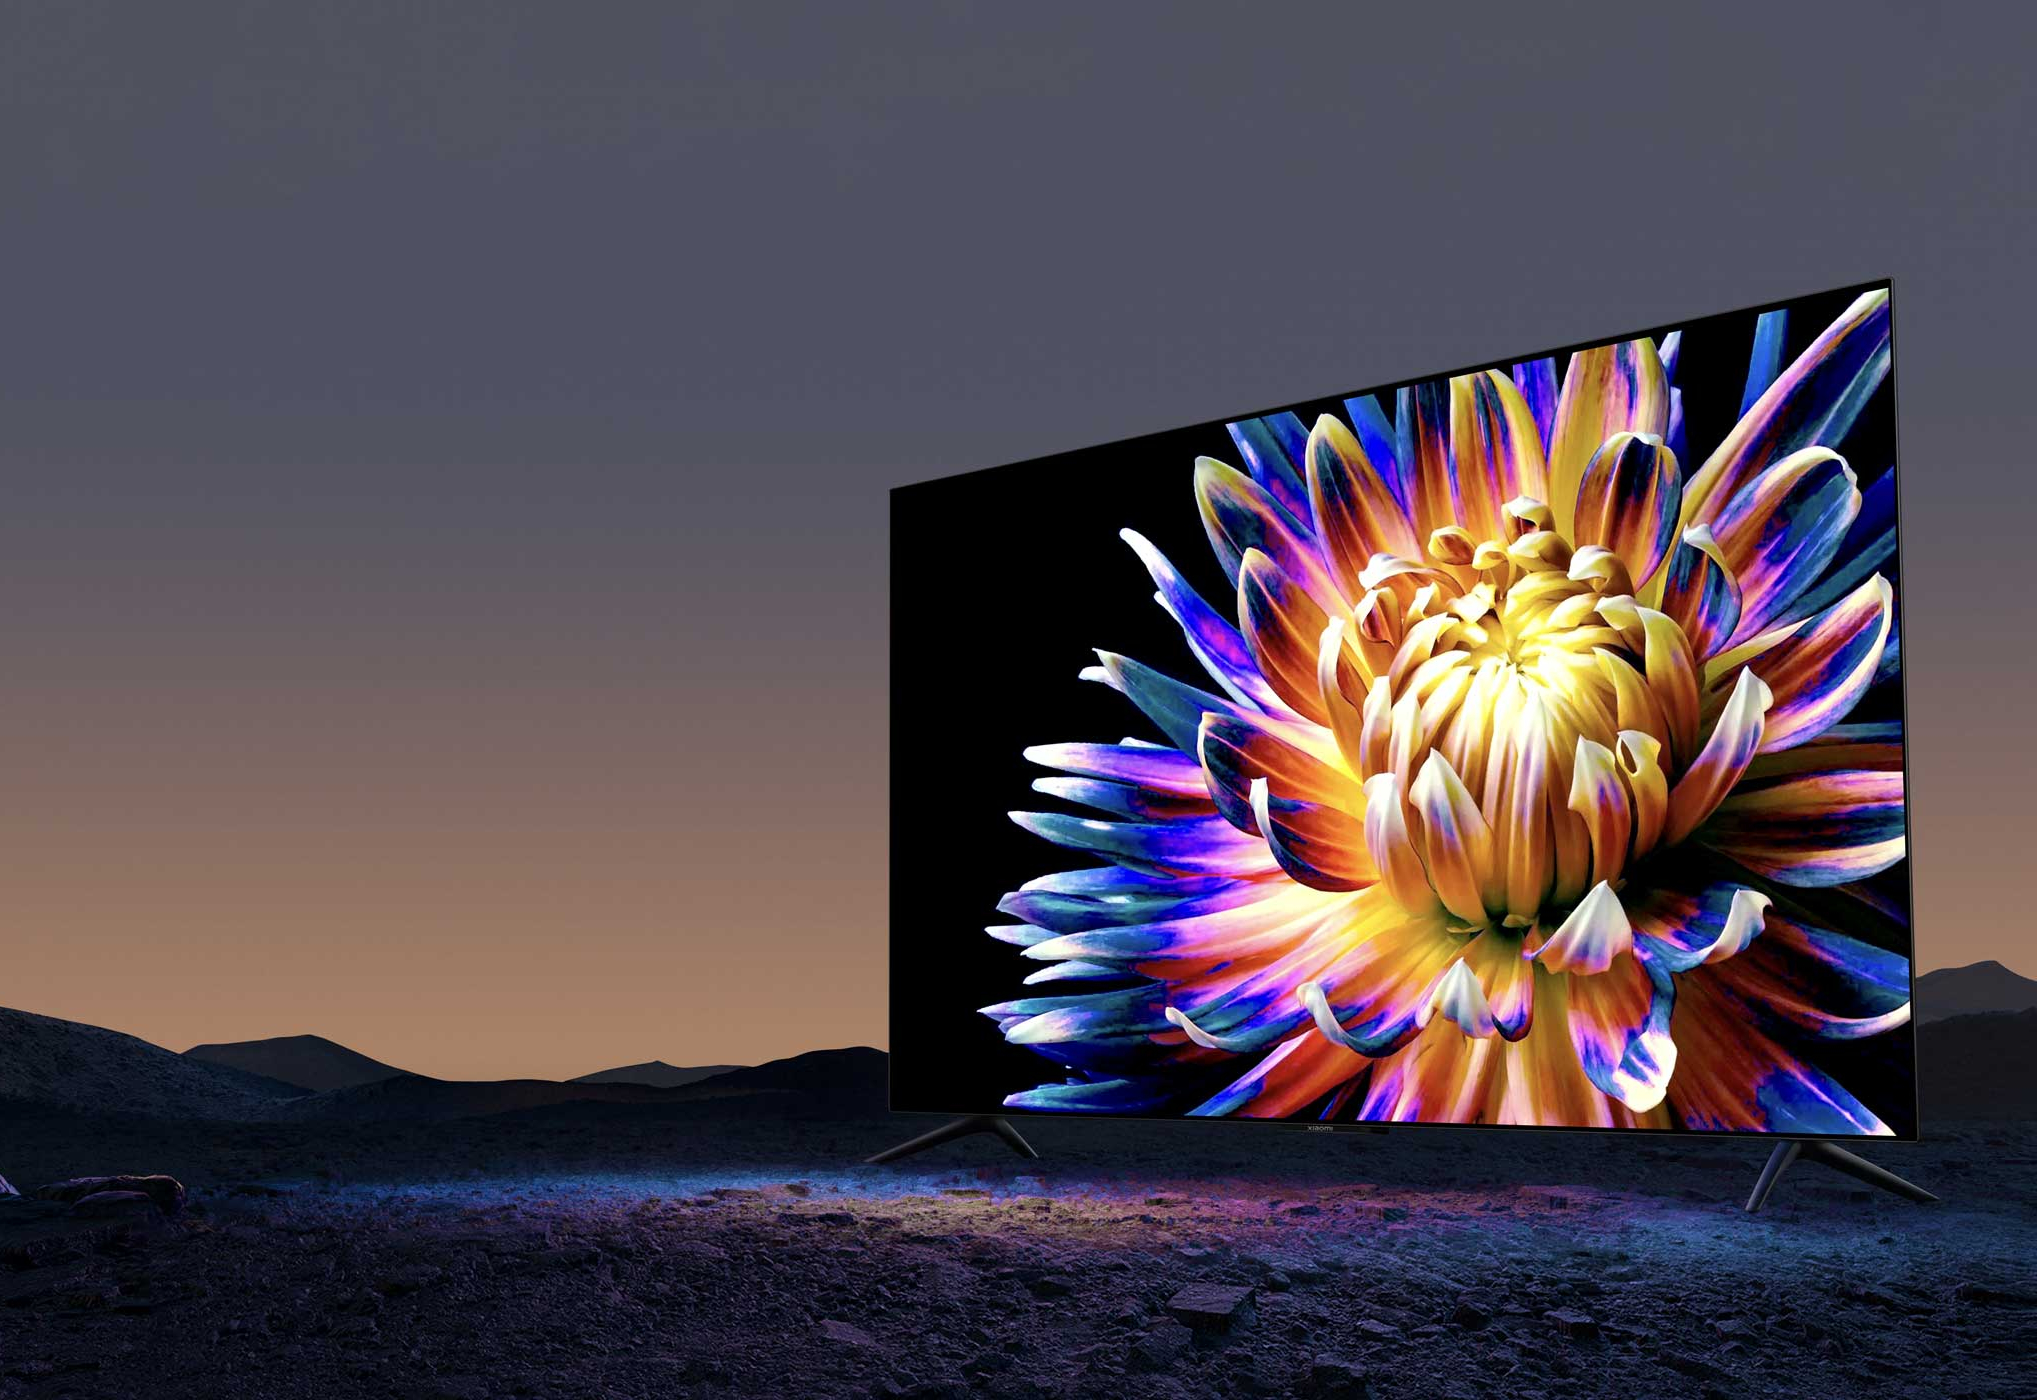 Xiaomi OLED Vision 55 Smart TV arrives with Android TV 11, Dolby Vision IQ,  8 speakers and a 4K OLED panel - NotebookCheck.net News